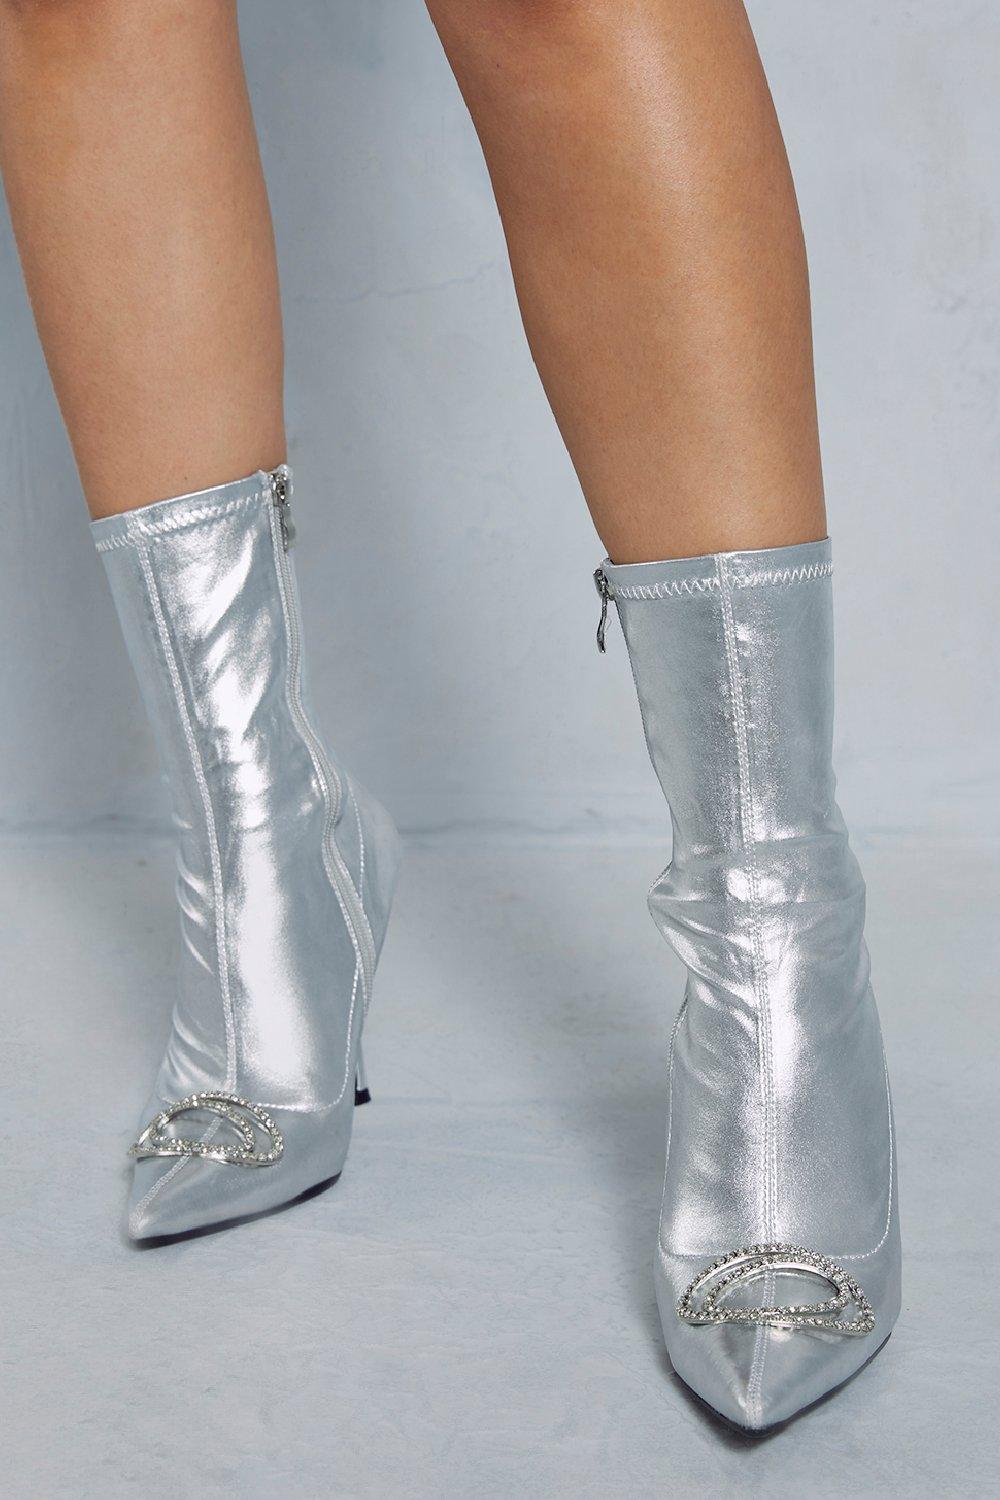 Womens Diamante Buckle Ankle Boots - silver - 8, Silver